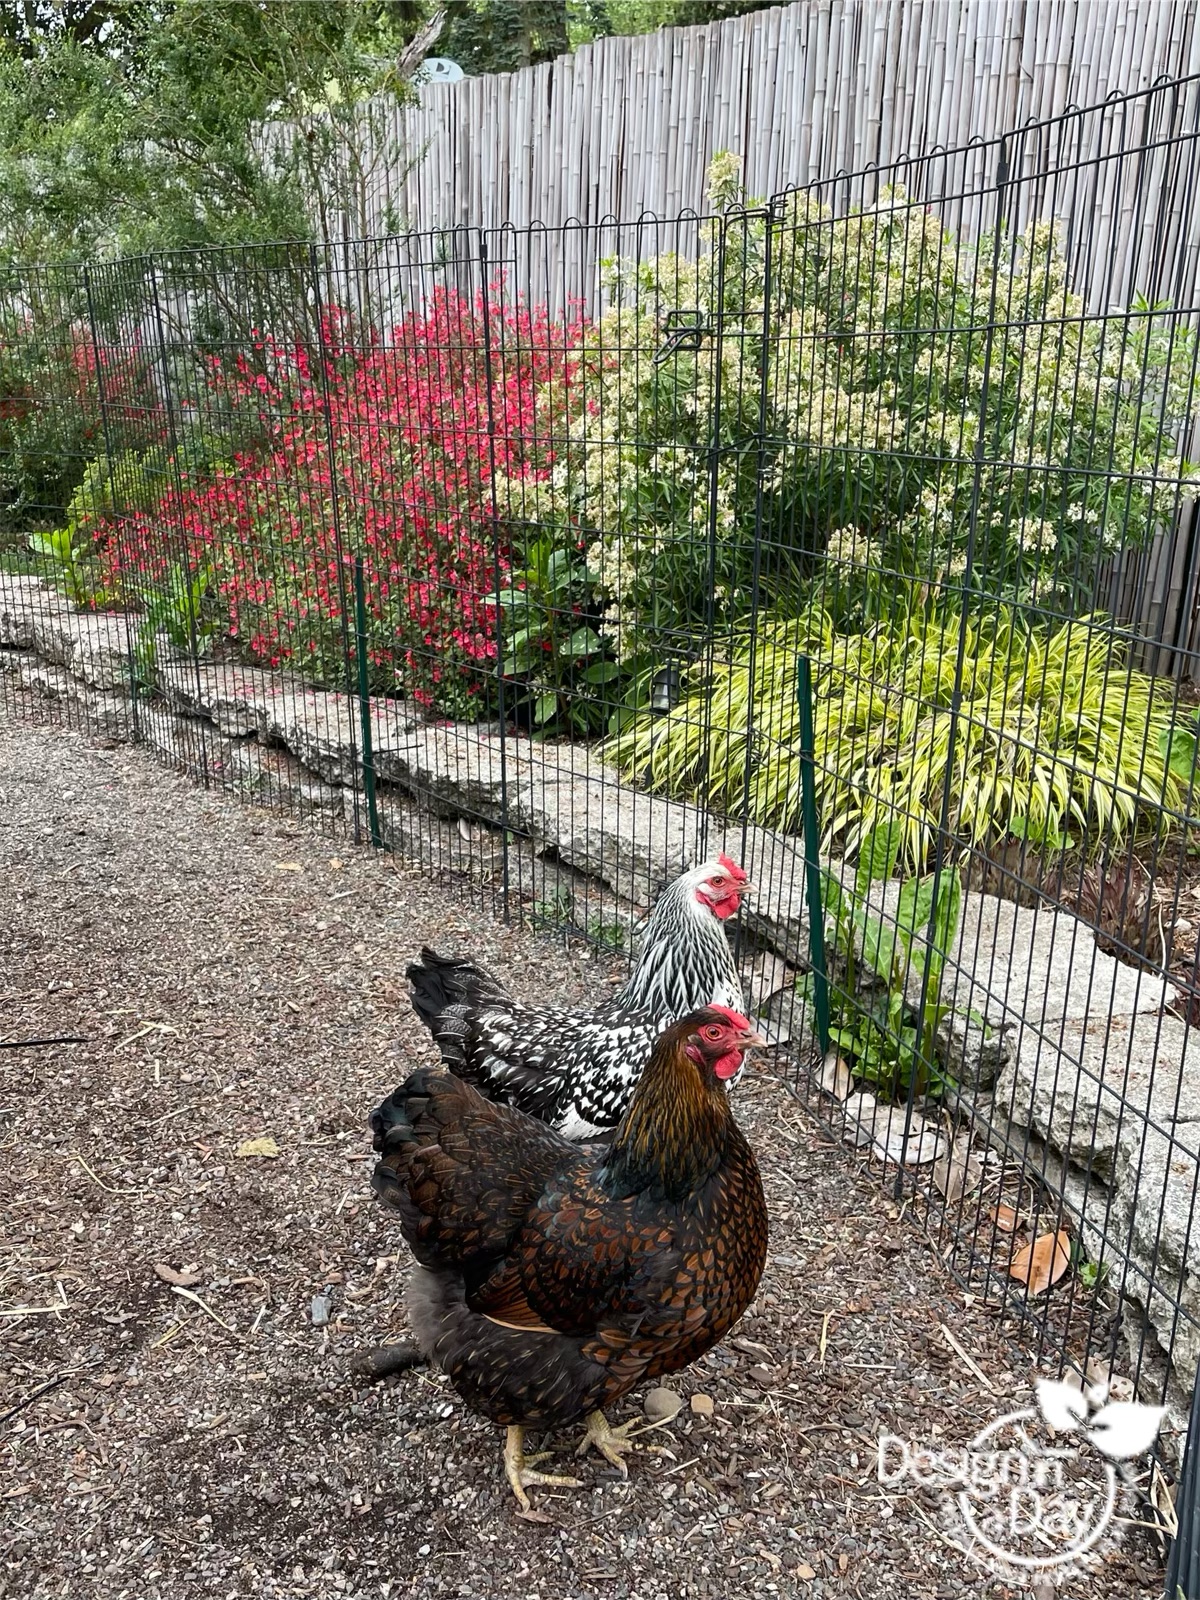 temporary chicken fence on gravel path with colorful flower bed